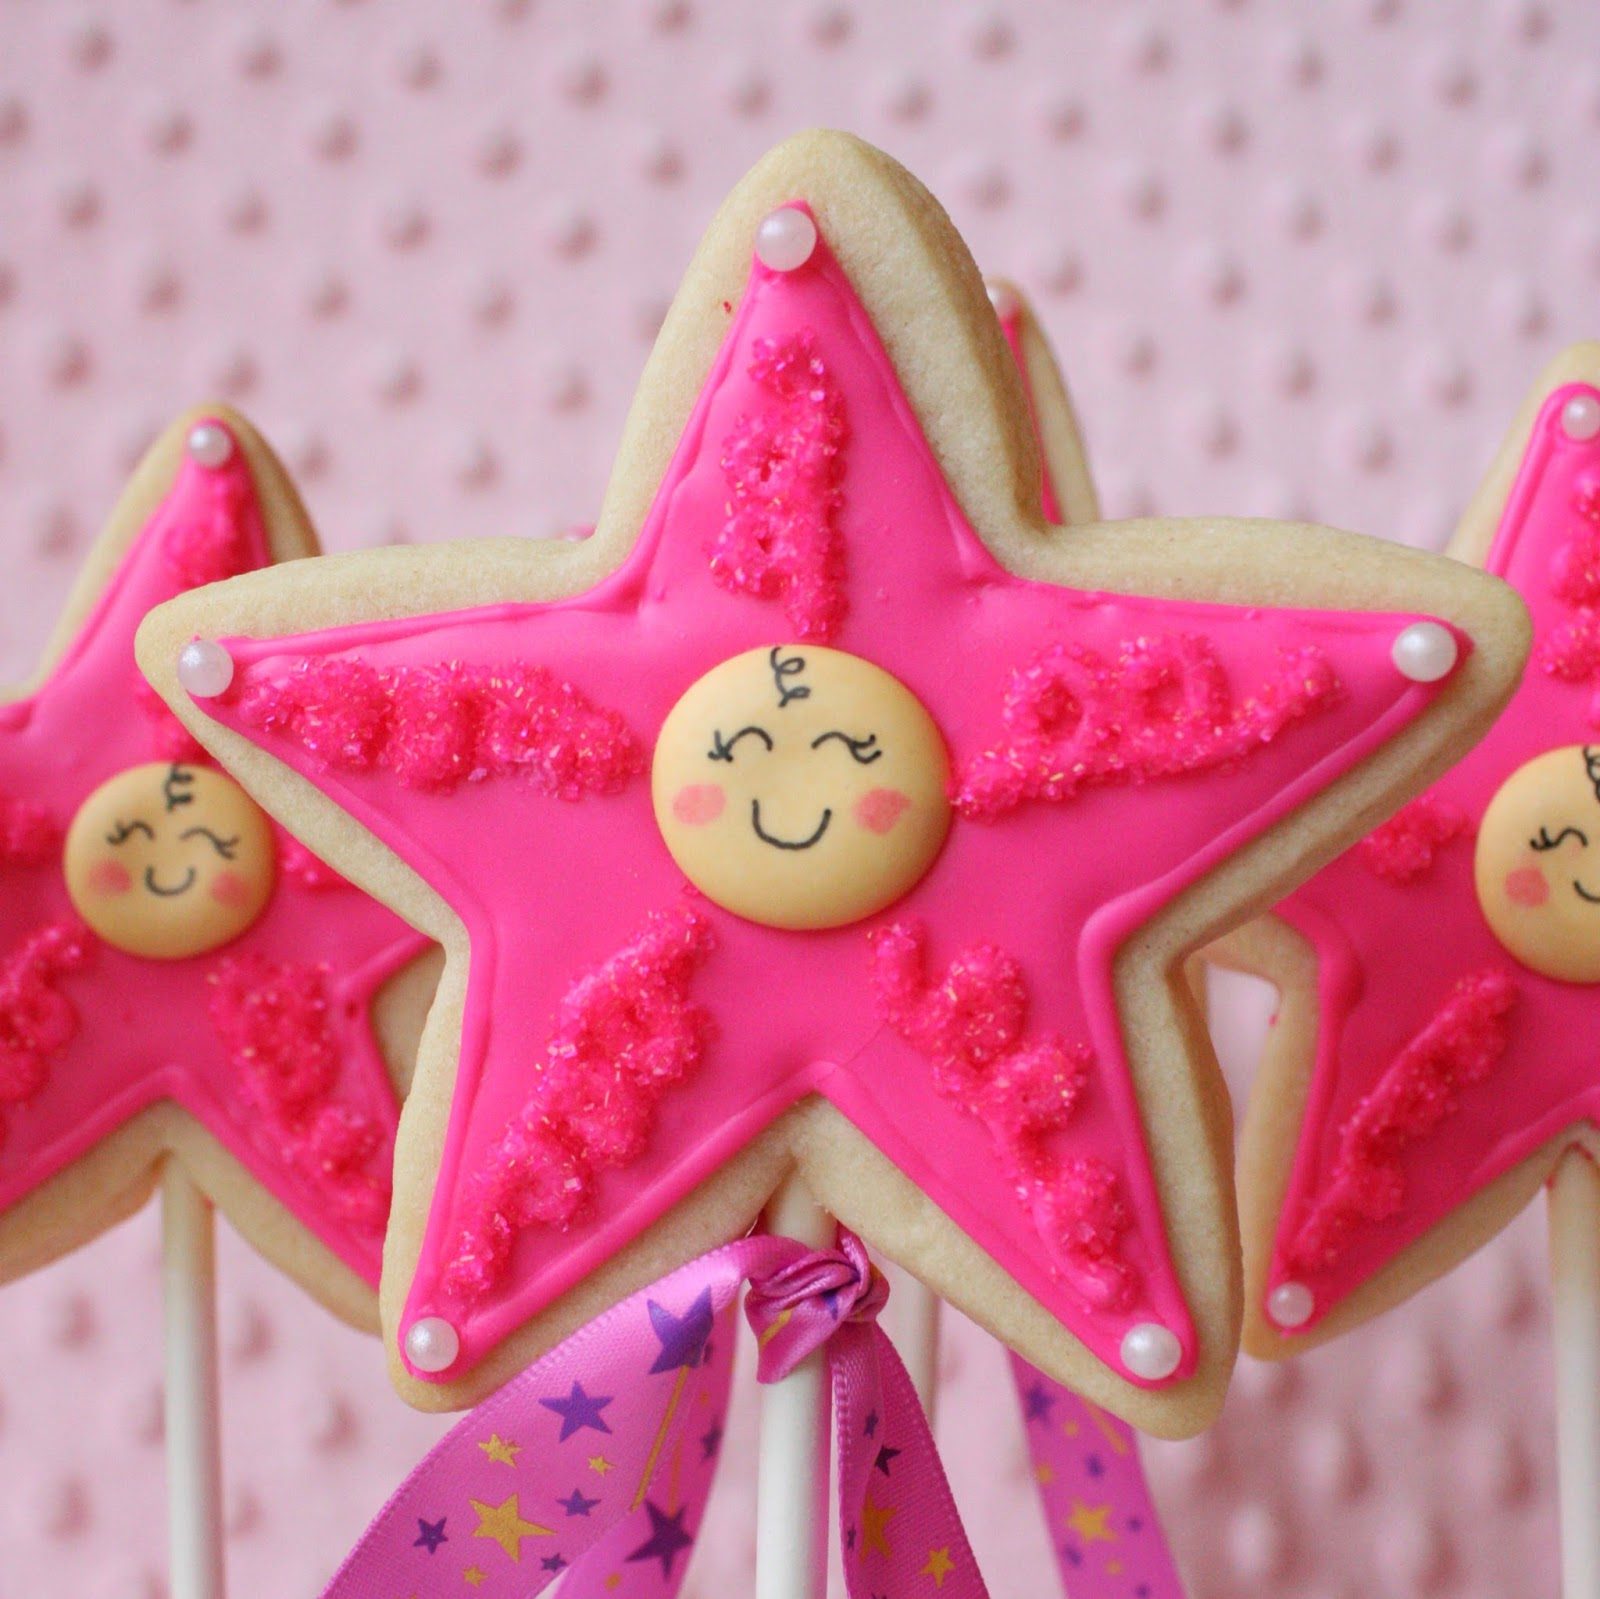 Princess Wand Cookies for a Virtual Baby Shower, Lay The Table